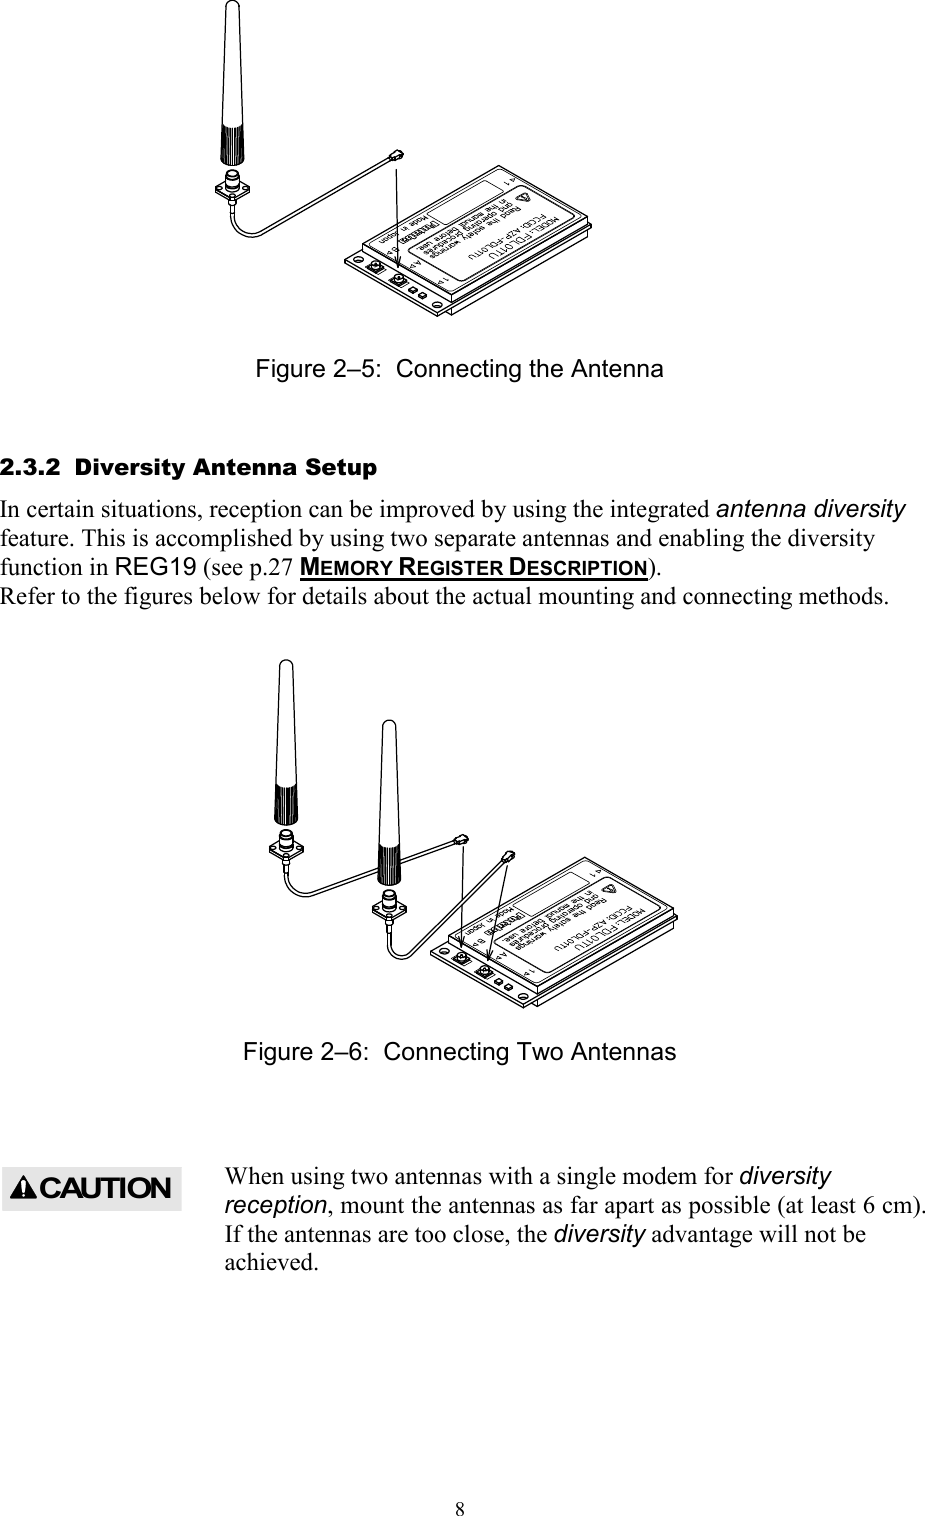   8             Figure 2–5:  Connecting the Antenna 2.3.2  Diversity Antenna Setup In certain situations, reception can be improved by using the integrated antenna diversity feature. This is accomplished by using two separate antennas and enabling the diversity function in REG19 (see p.27 MEMORY REGISTER DESCRIPTION).  Refer to the figures below for details about the actual mounting and connecting methods.               Figure 2–6:  Connecting Two Antennas  When using two antennas with a single modem for diversity reception, mount the antennas as far apart as possible (at least 6 cm). If the antennas are too close, the diversity advantage will not be achieved.     CAUTION